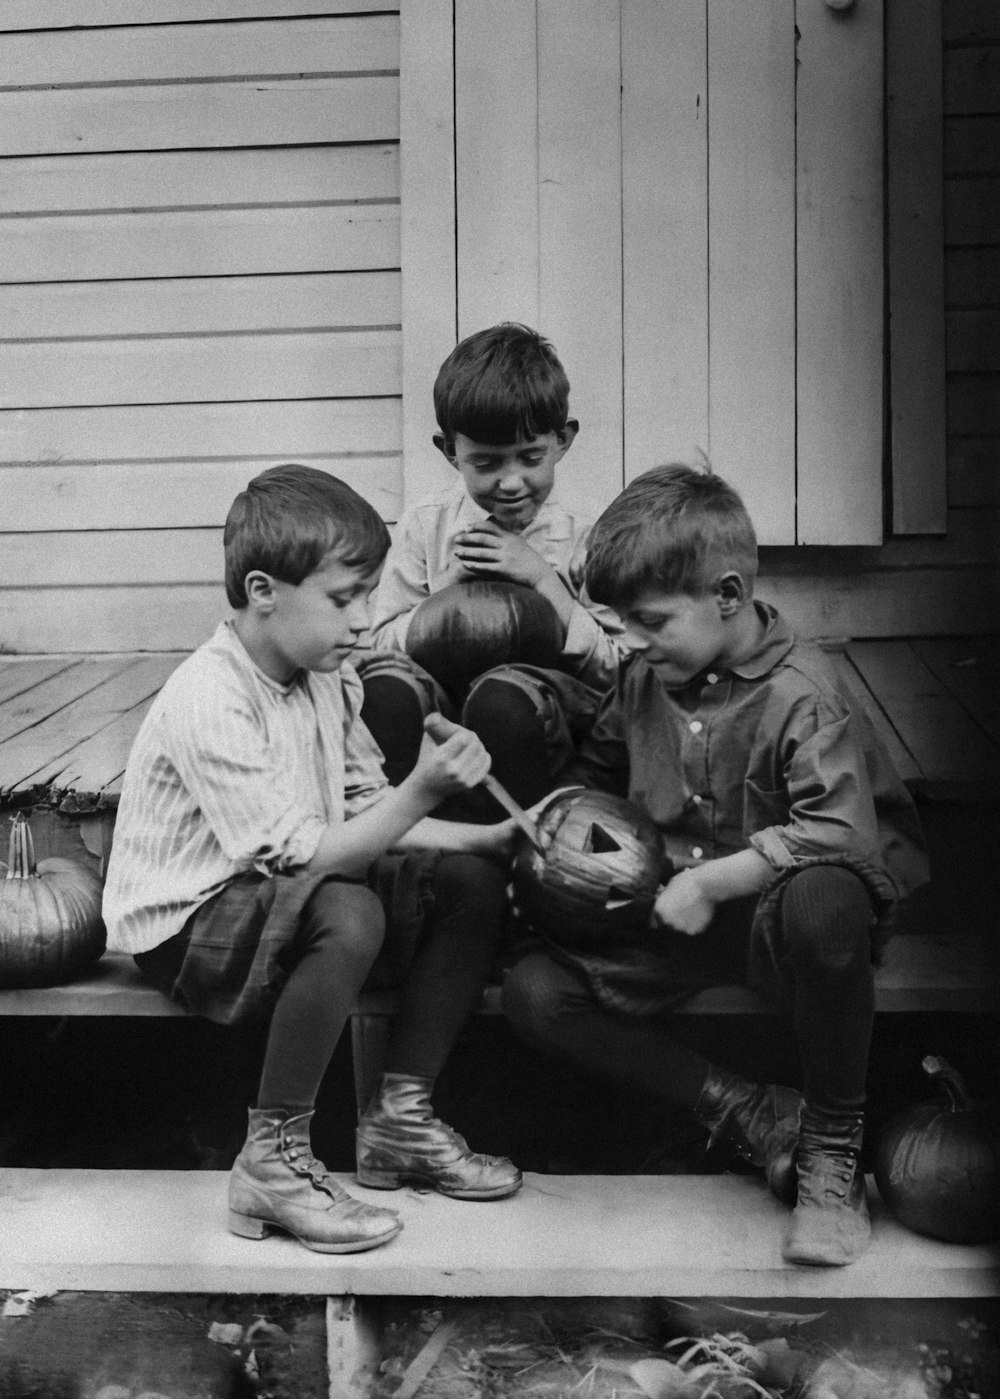 a group of young boys sitting on top of a wooden bench